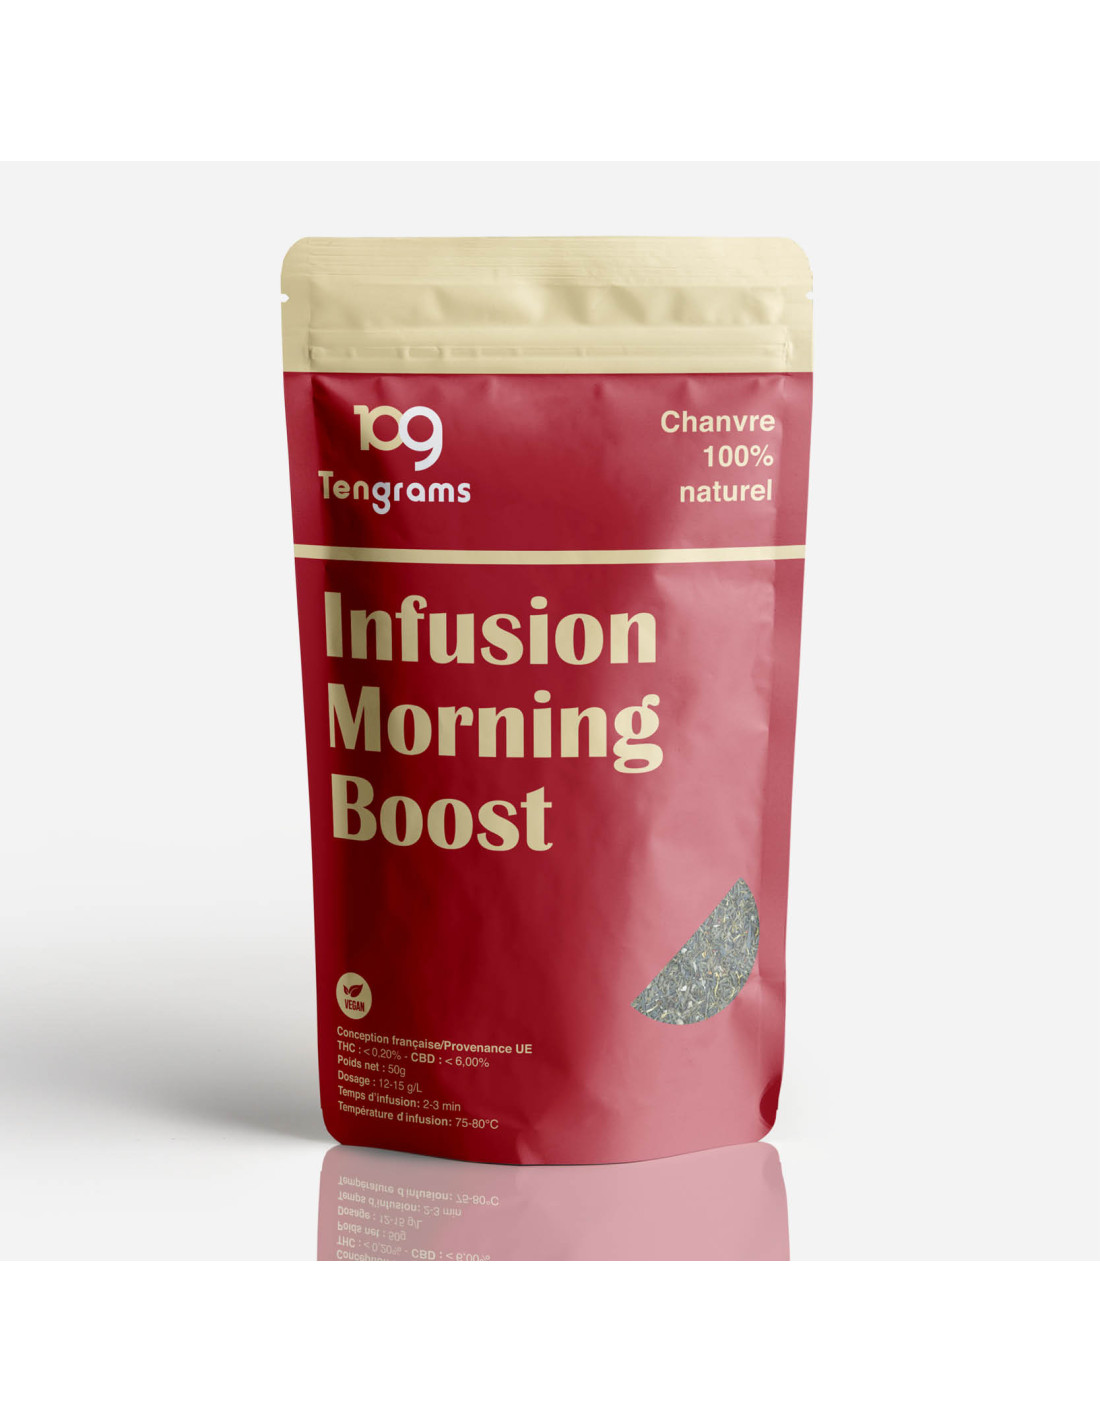 the-infusion-morning boost-tengrams